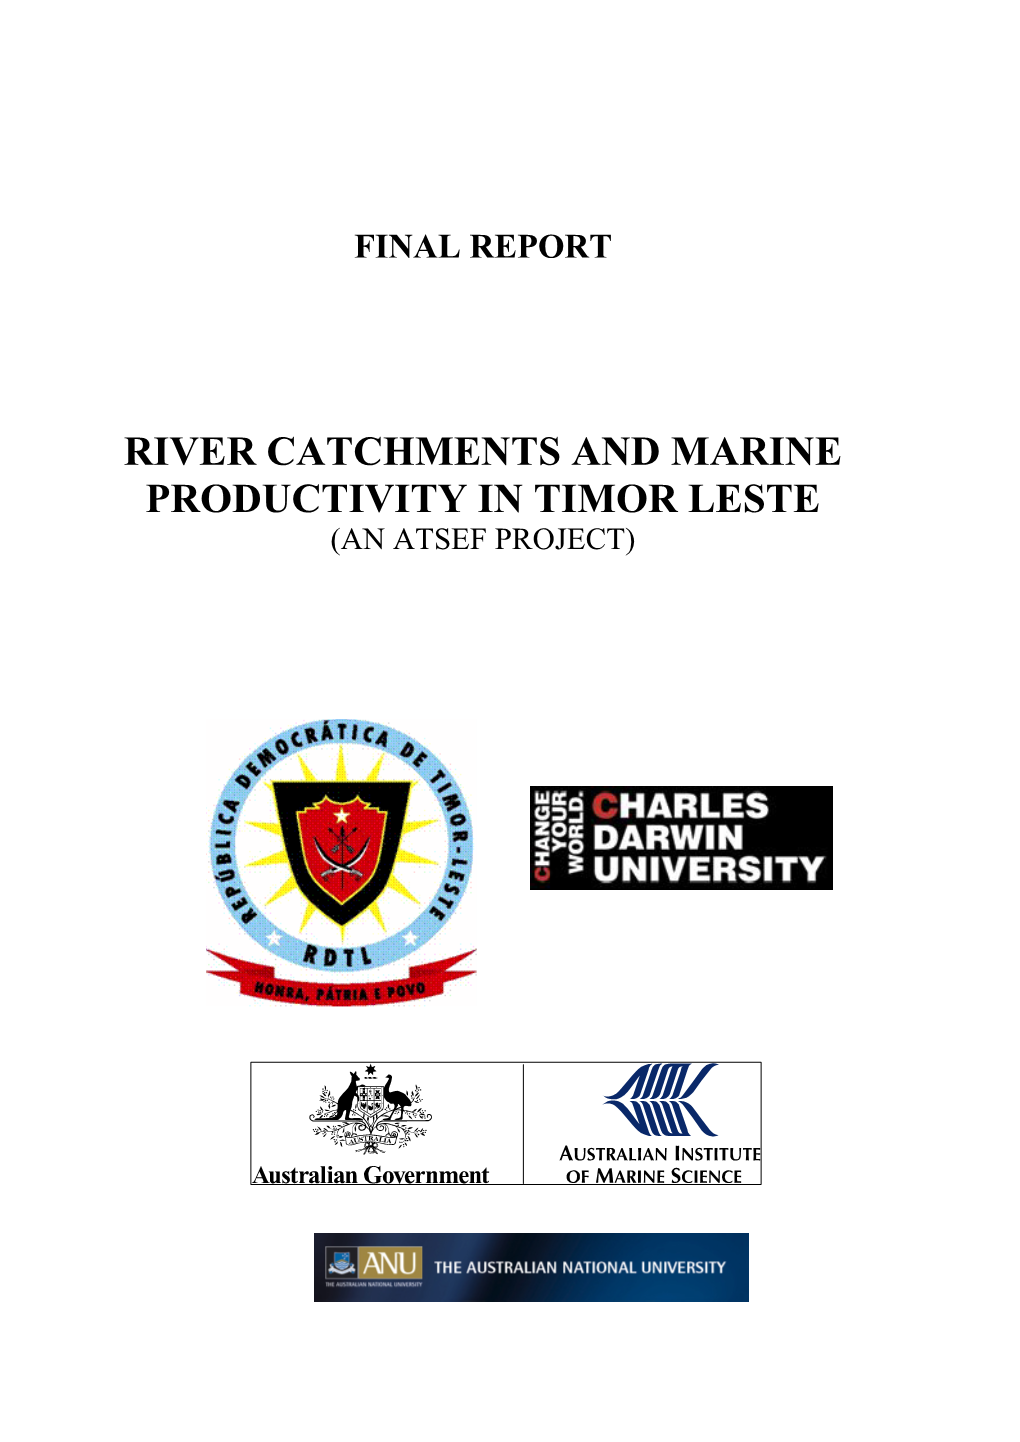 Final Report River Catchments and Marine Productivity in Timor Leste